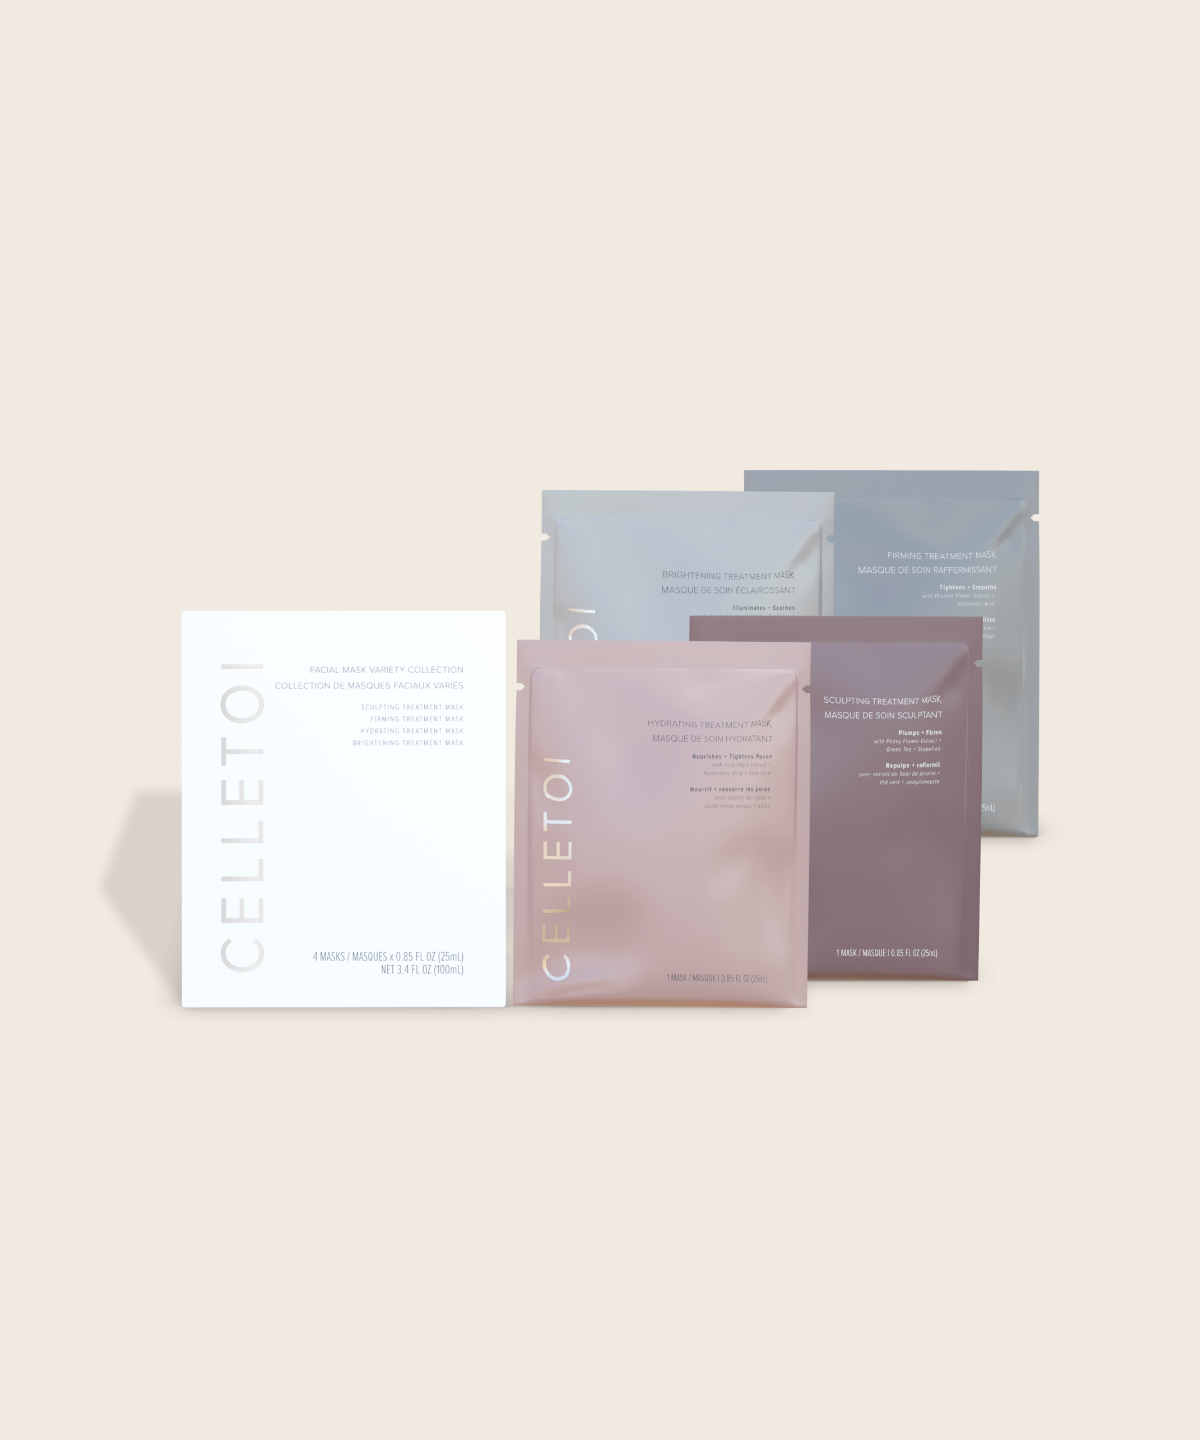 Limited-Edition Celletoi™ Facial Mask Variety Collection